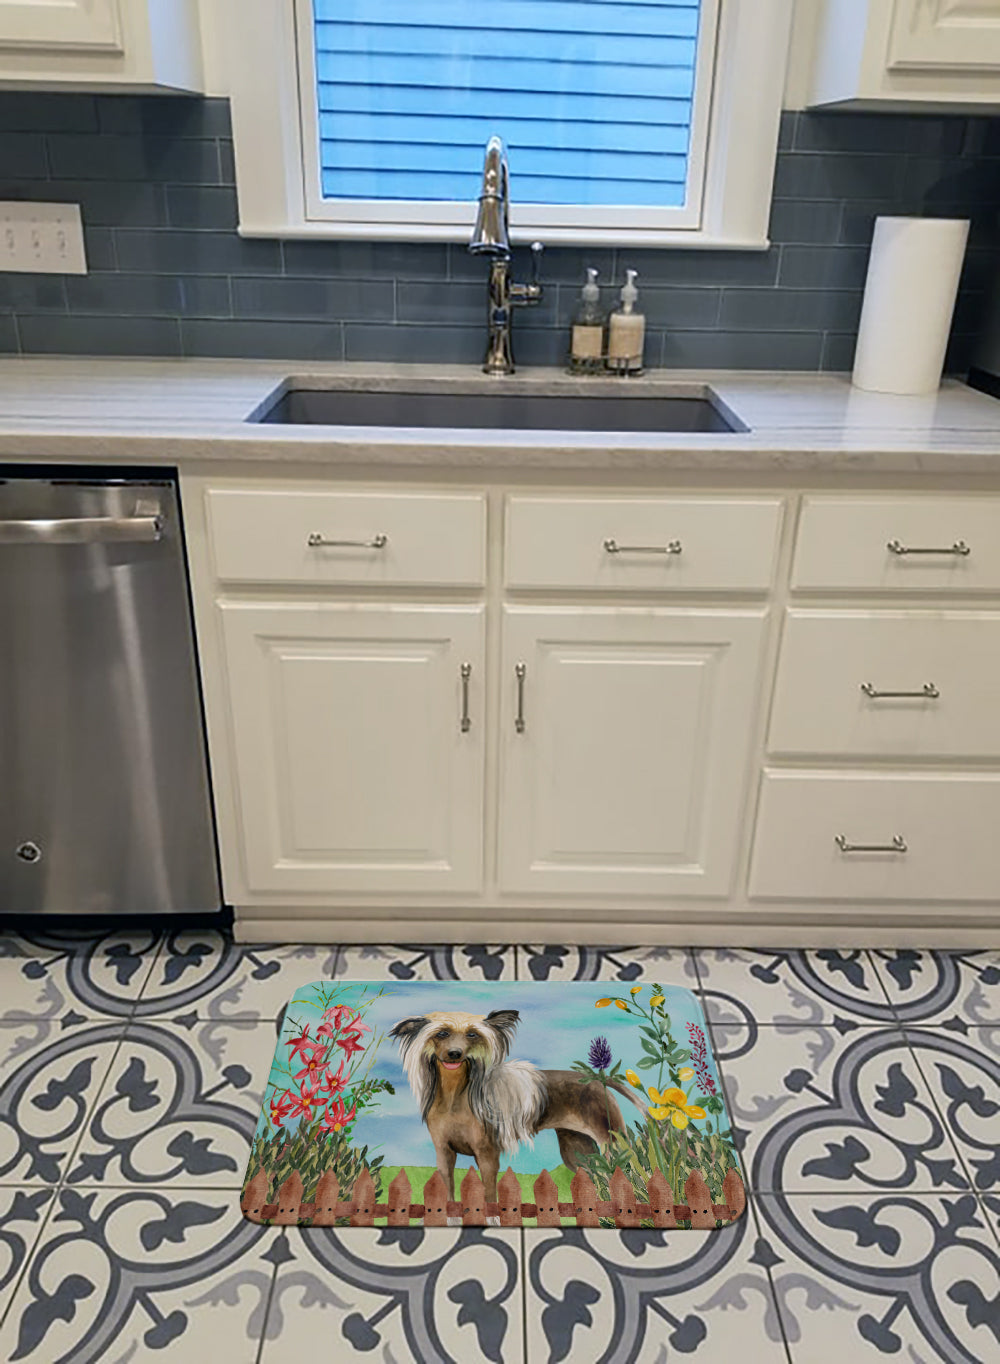 Chinese Crested Spring Machine Washable Memory Foam Mat CK1221RUG - the-store.com